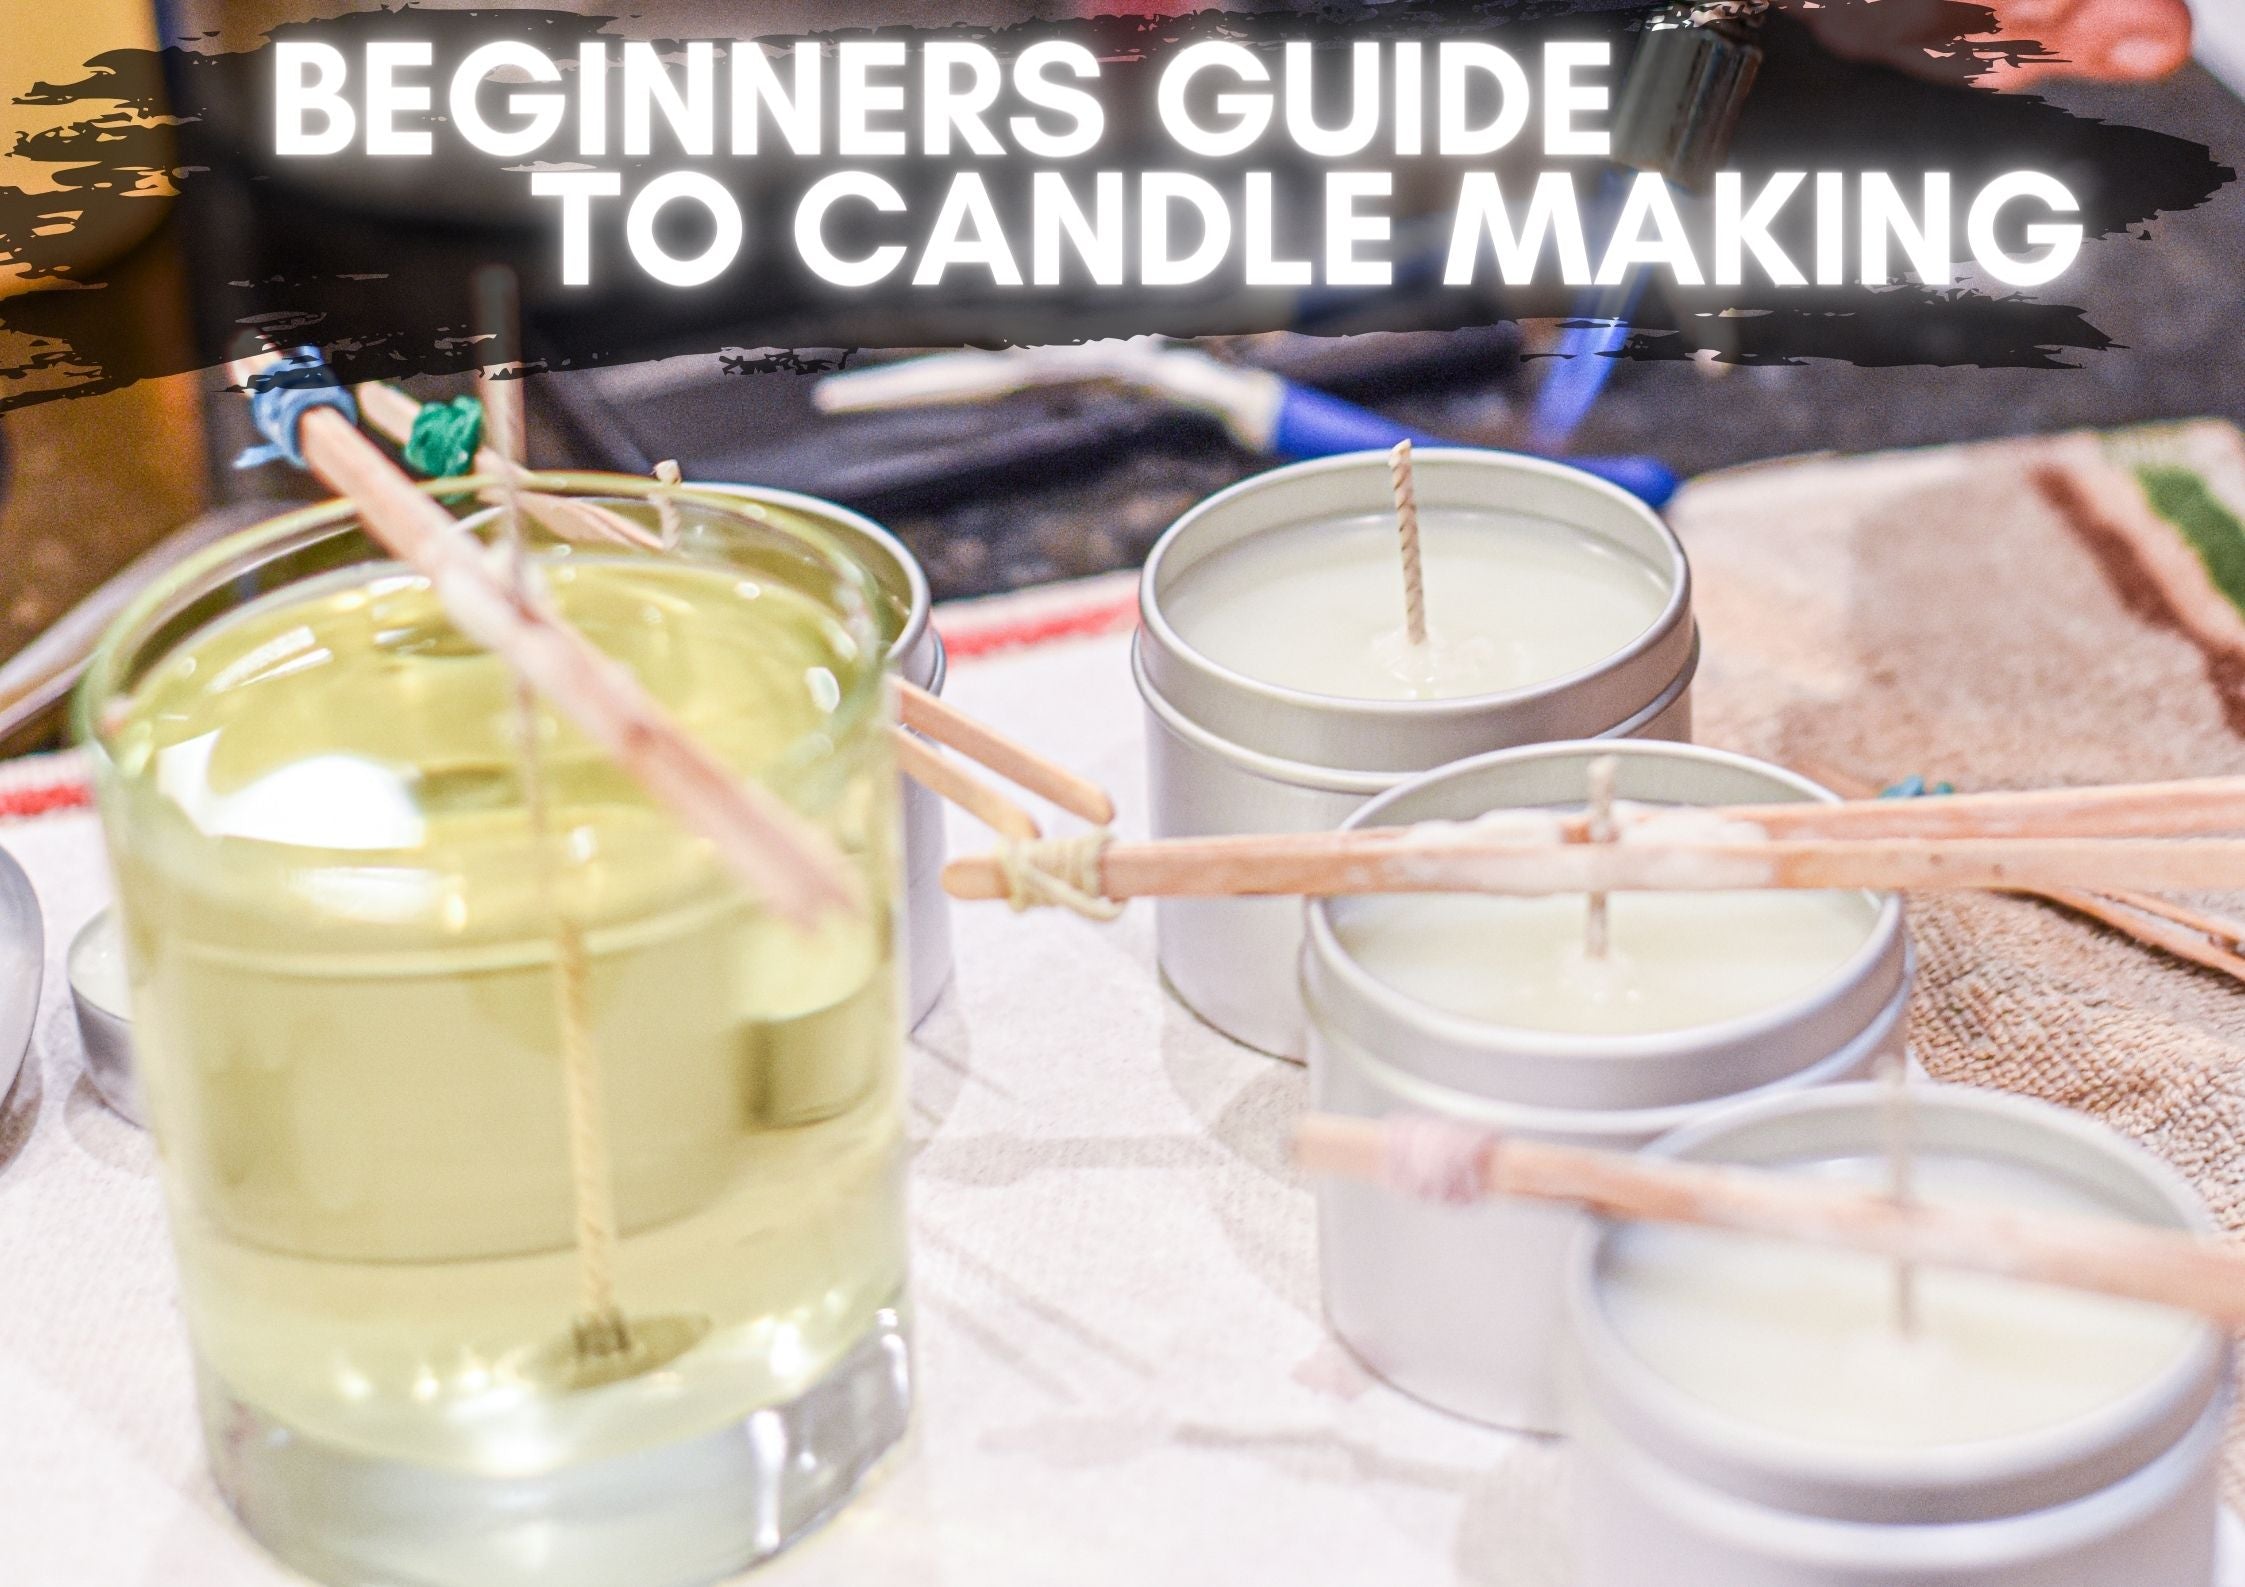 Candle making for beginners